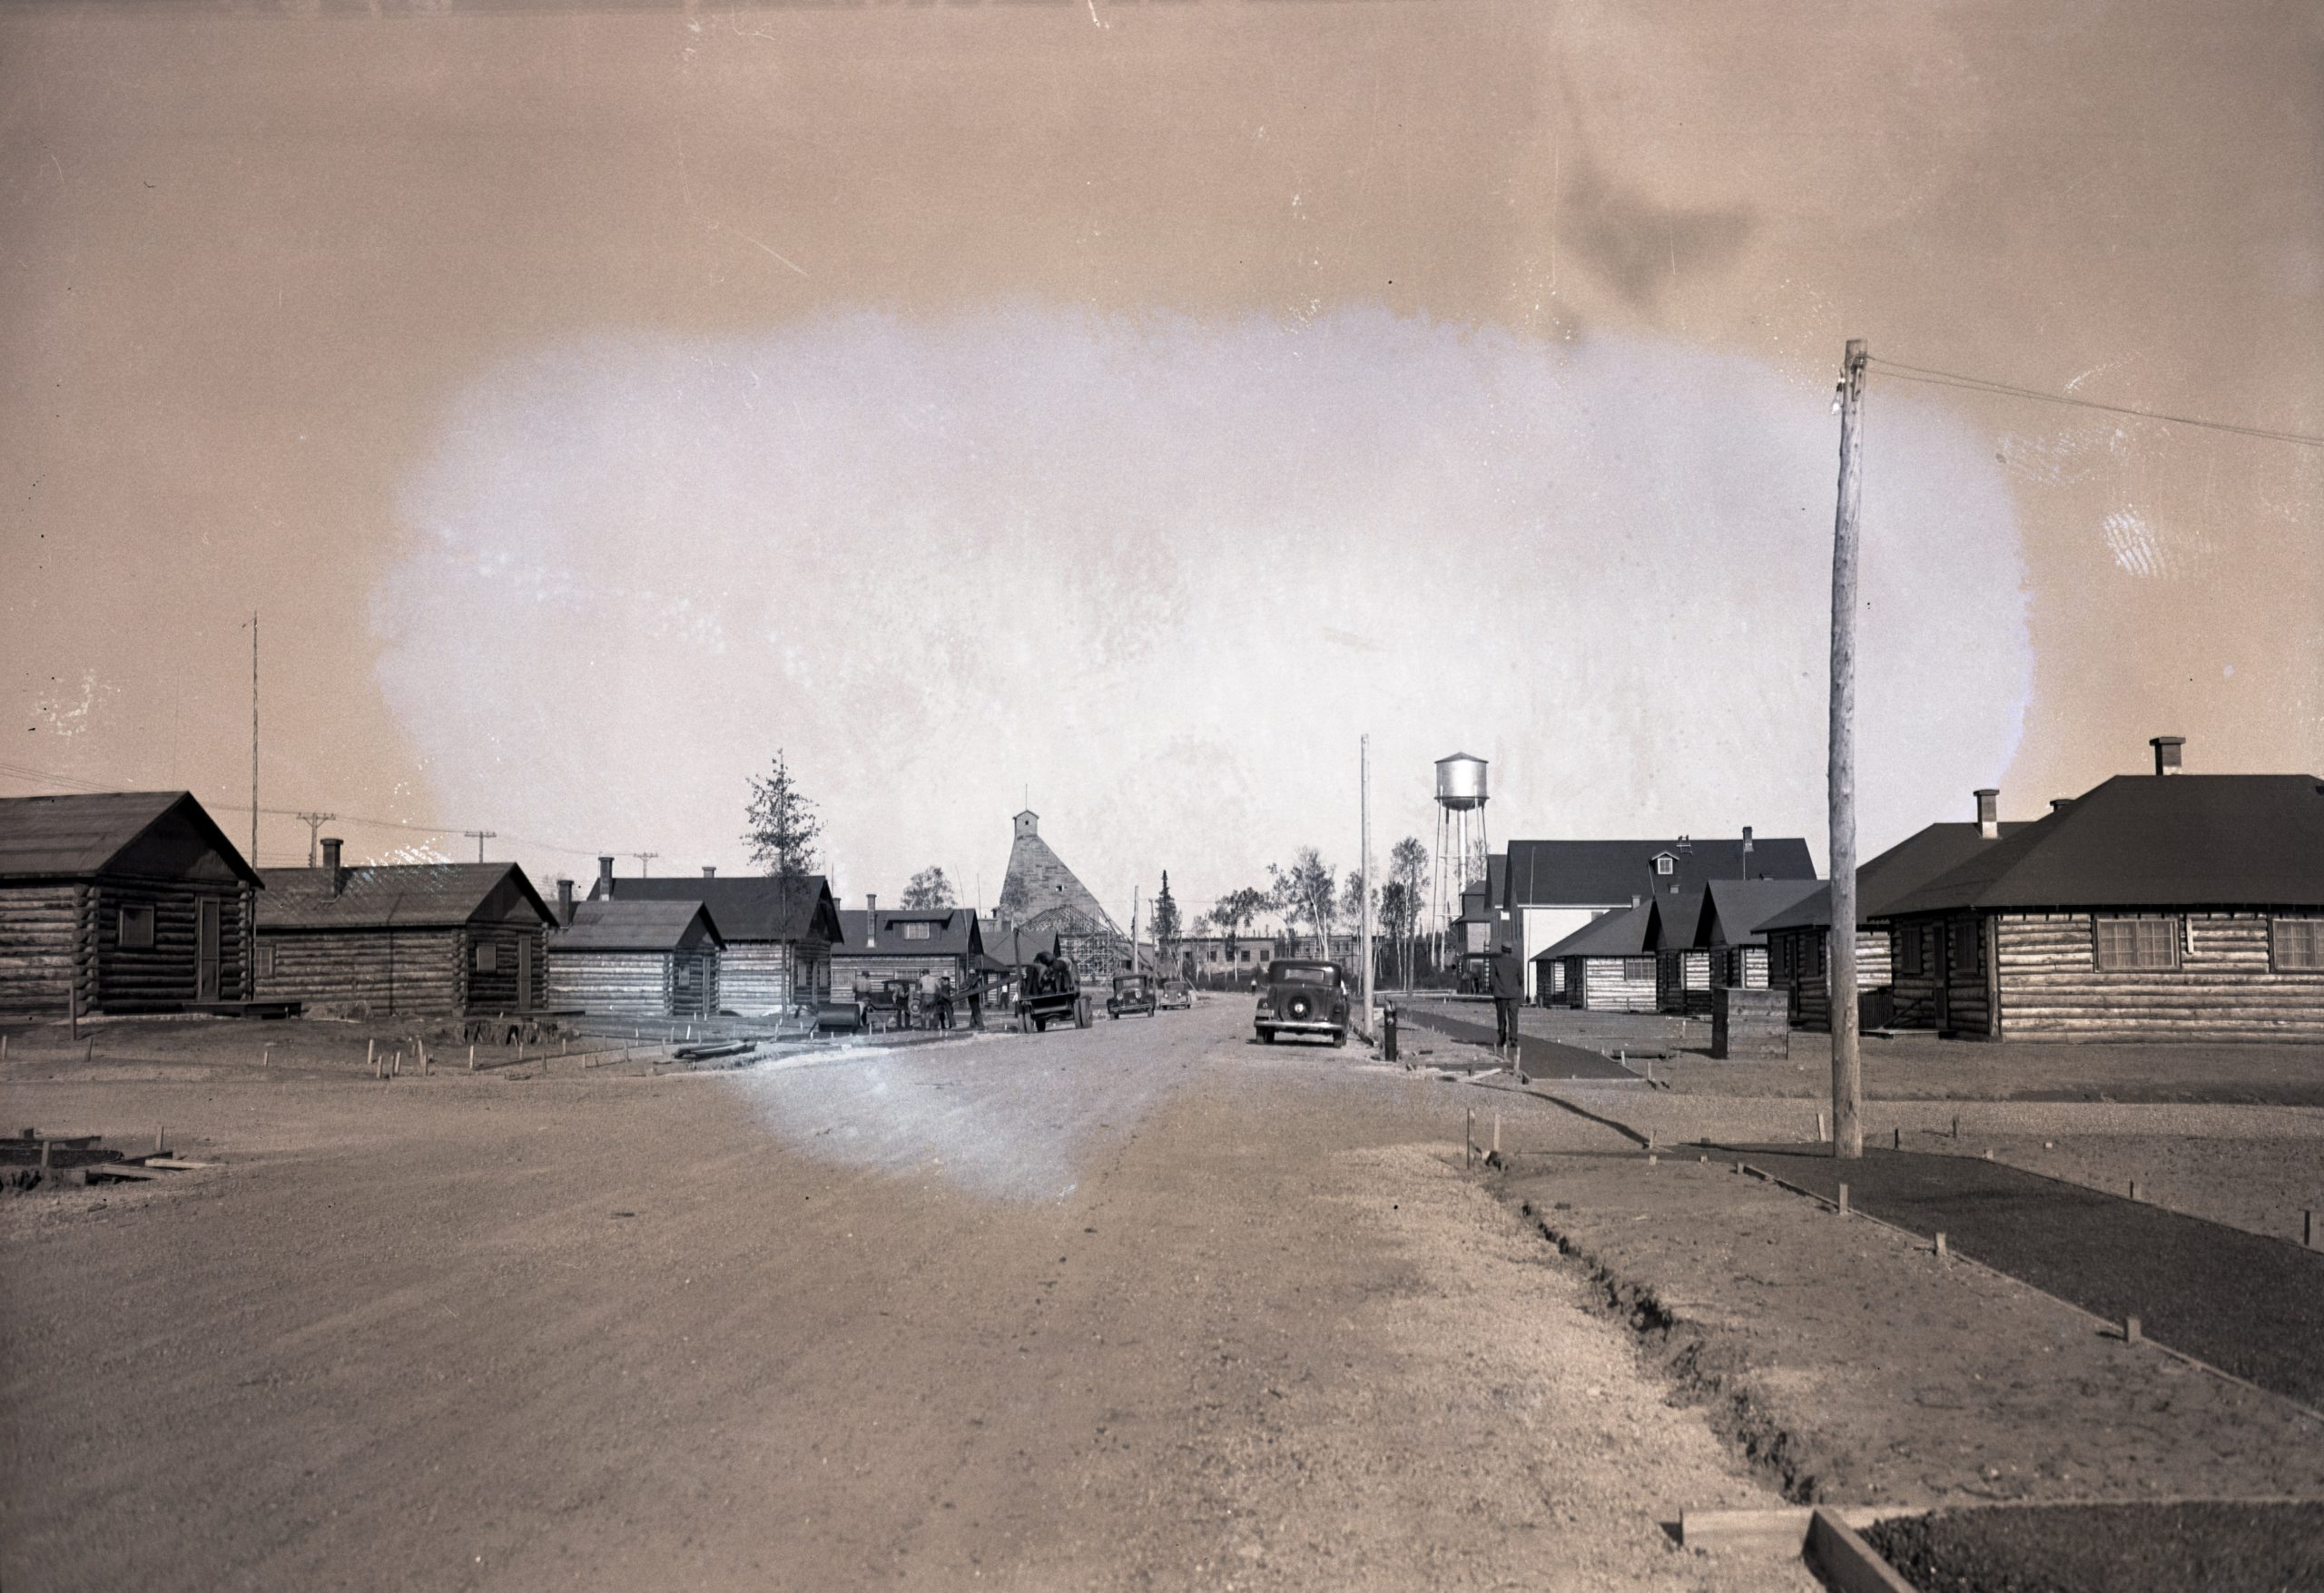 Black and white photograph of a street lined with log cabins. Men are at work on pavement. In the background, a water tower and a mine headframe.